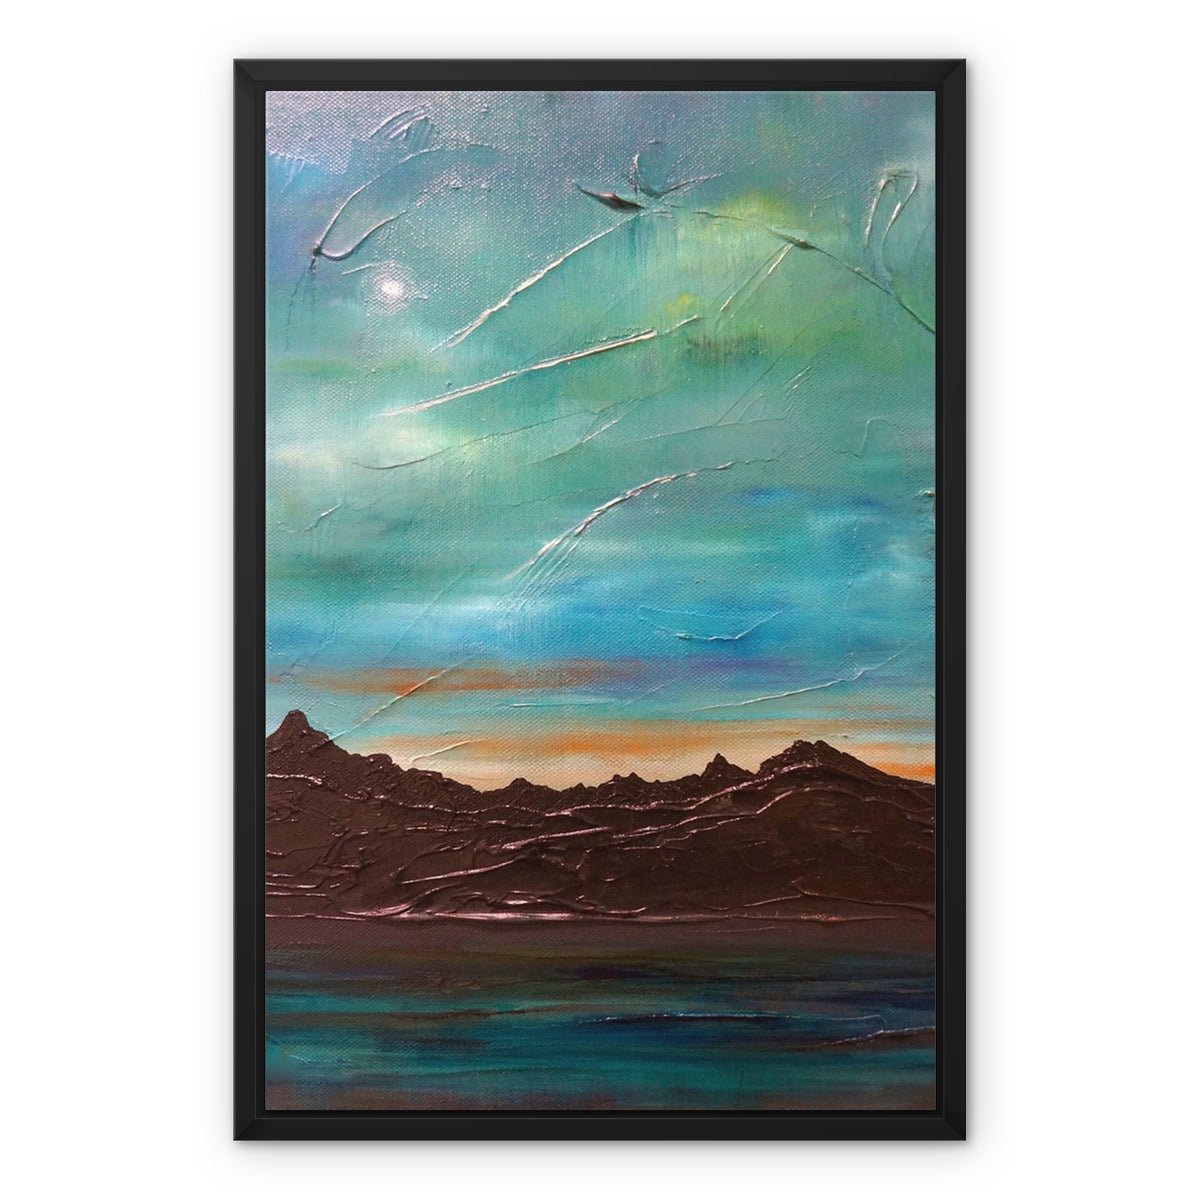 The Cuillin From Elgol Skye Painting | Framed Canvas From Scotland-Floating Framed Canvas Prints-Skye Art Gallery-18"x24"-Black Frame-Paintings, Prints, Homeware, Art Gifts From Scotland By Scottish Artist Kevin Hunter